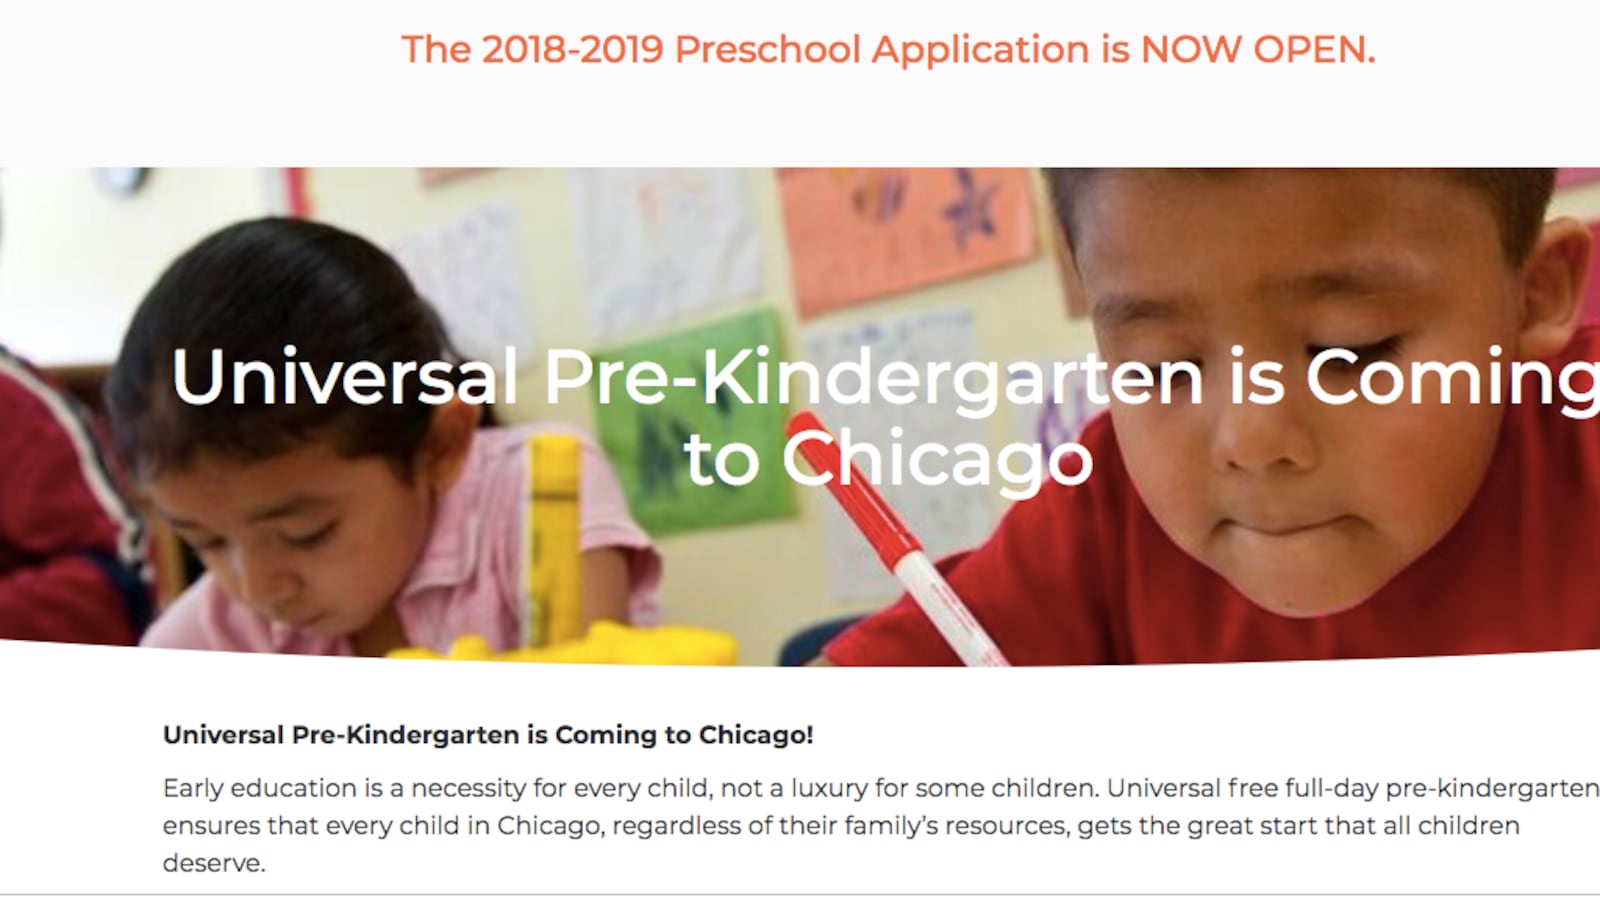 Families can apply to preschool through Chicago's early learning portal beginning in April.